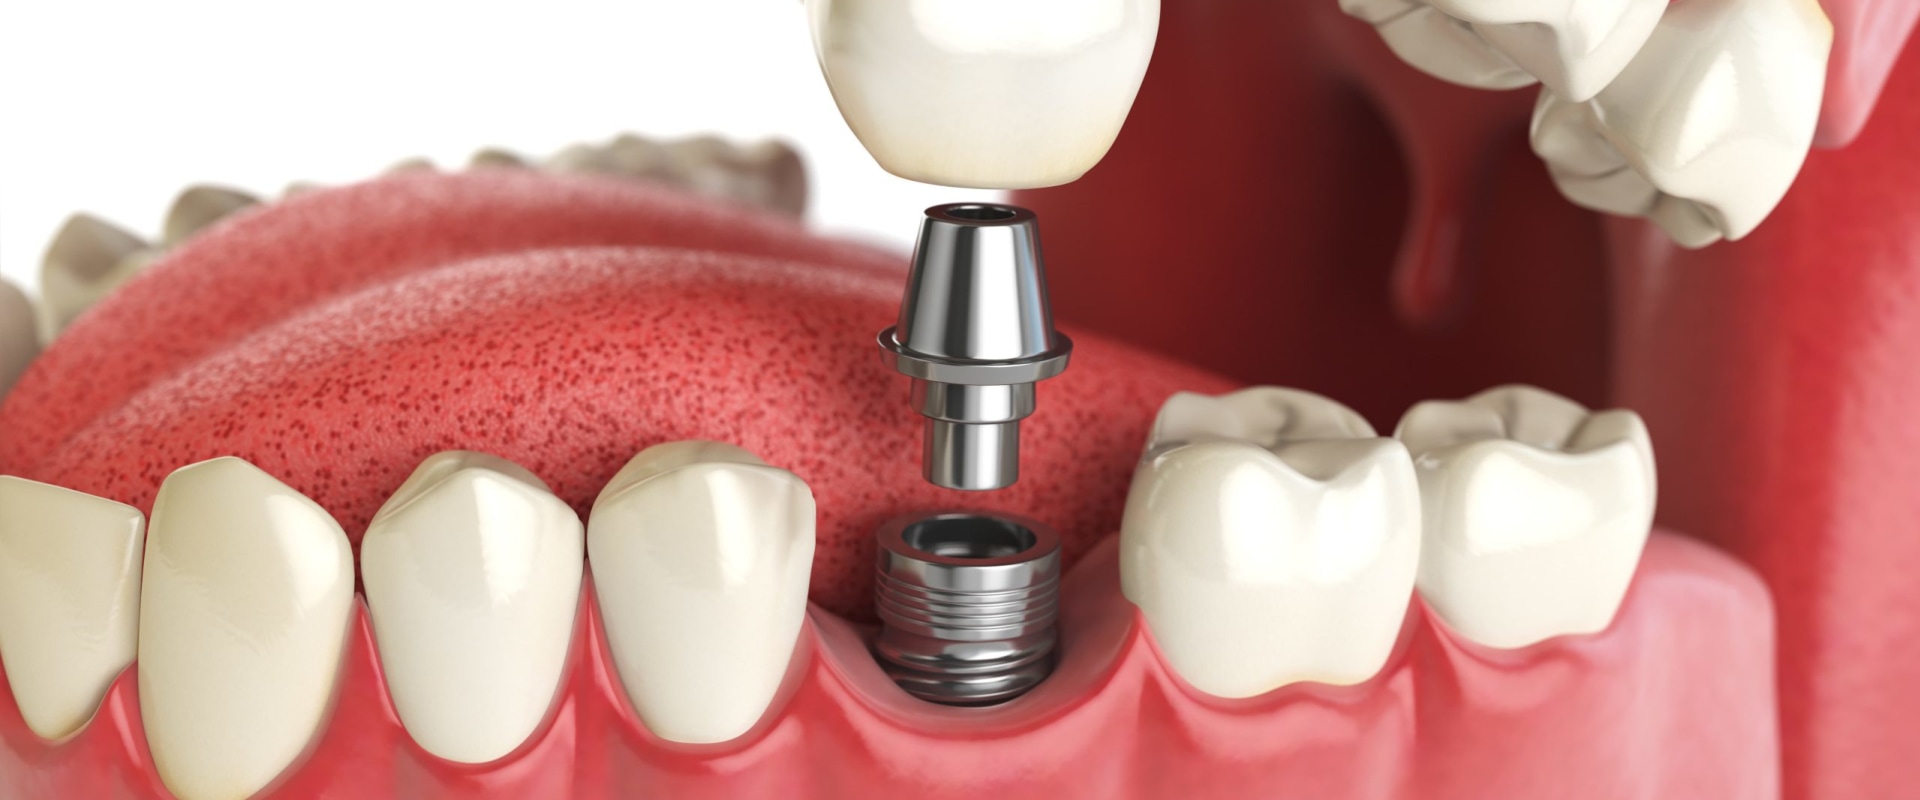 Austin General Dentistry: The Benefits Of Getting Implants From An Experienced General Dentist